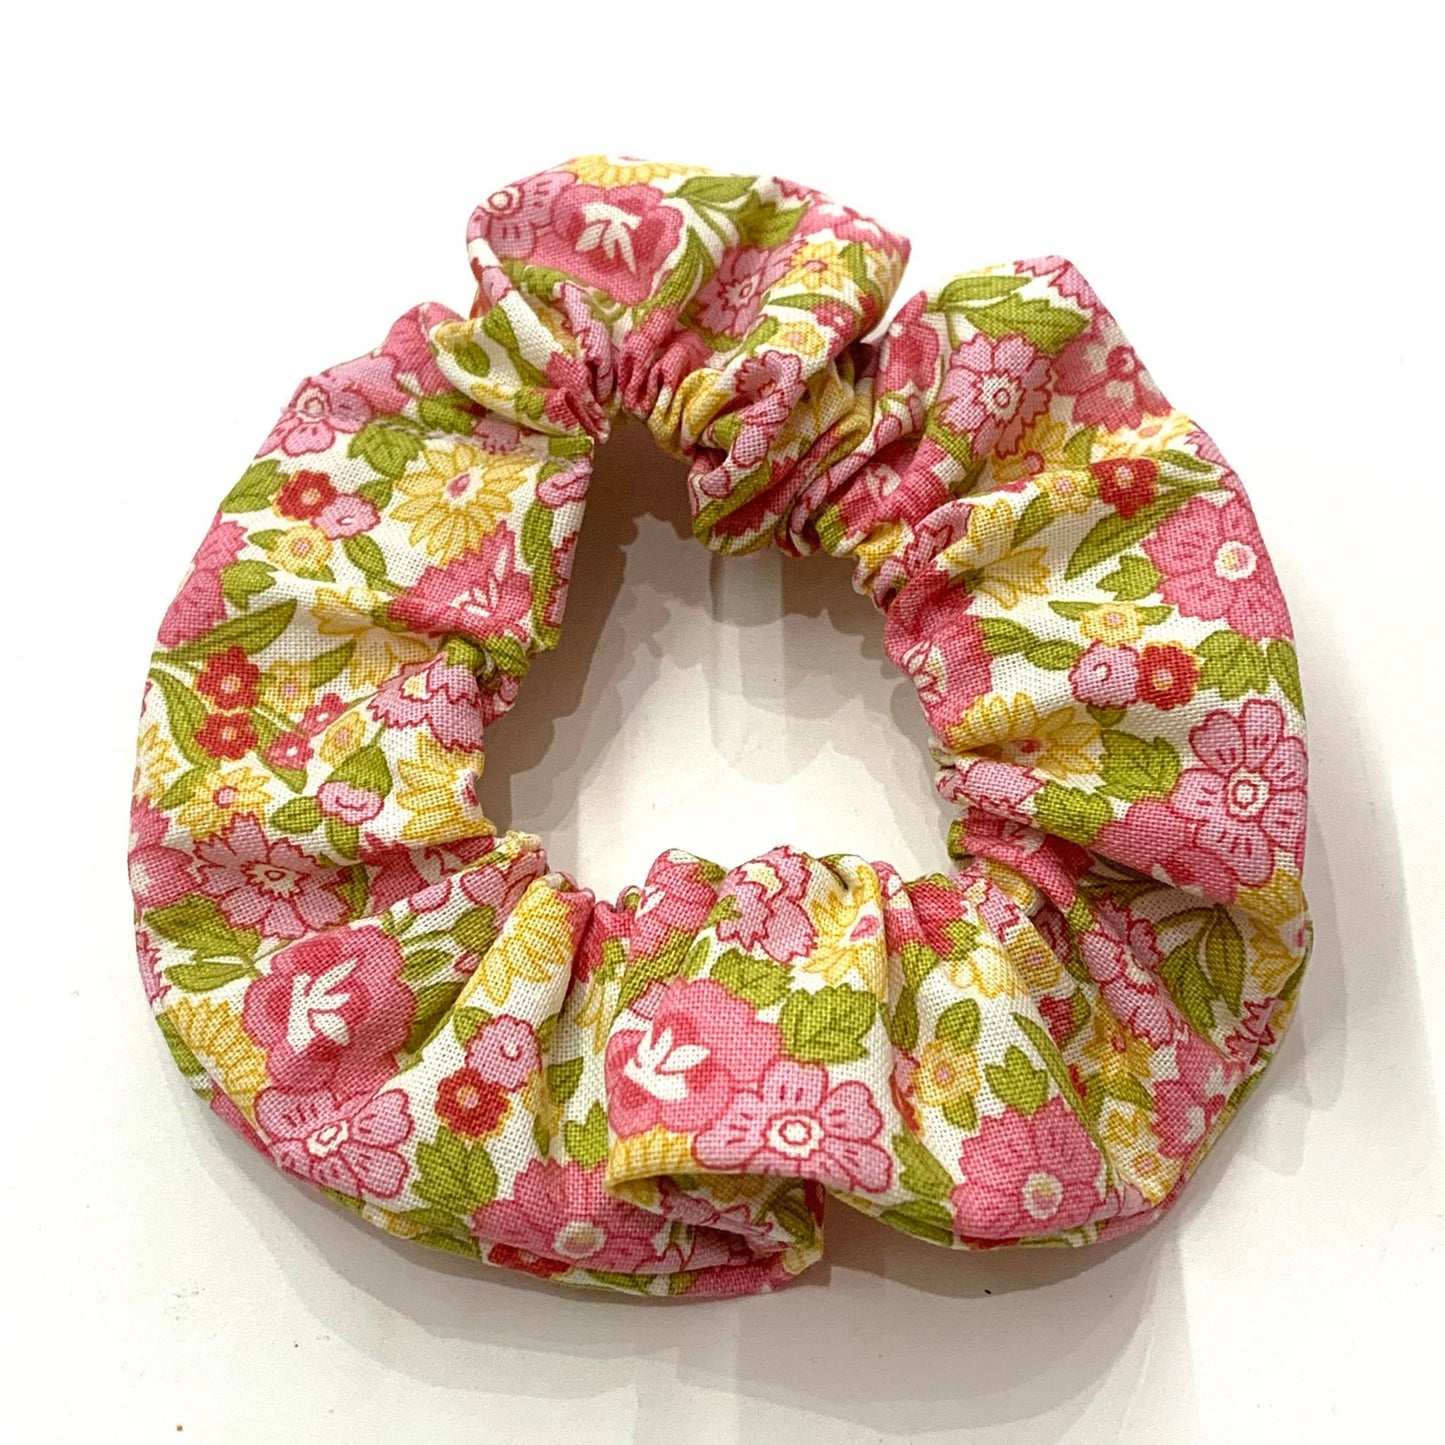 MAKIN' WHOOPEE - "Pink & Yellow Floral"  REGULAR SCRUNCHIES